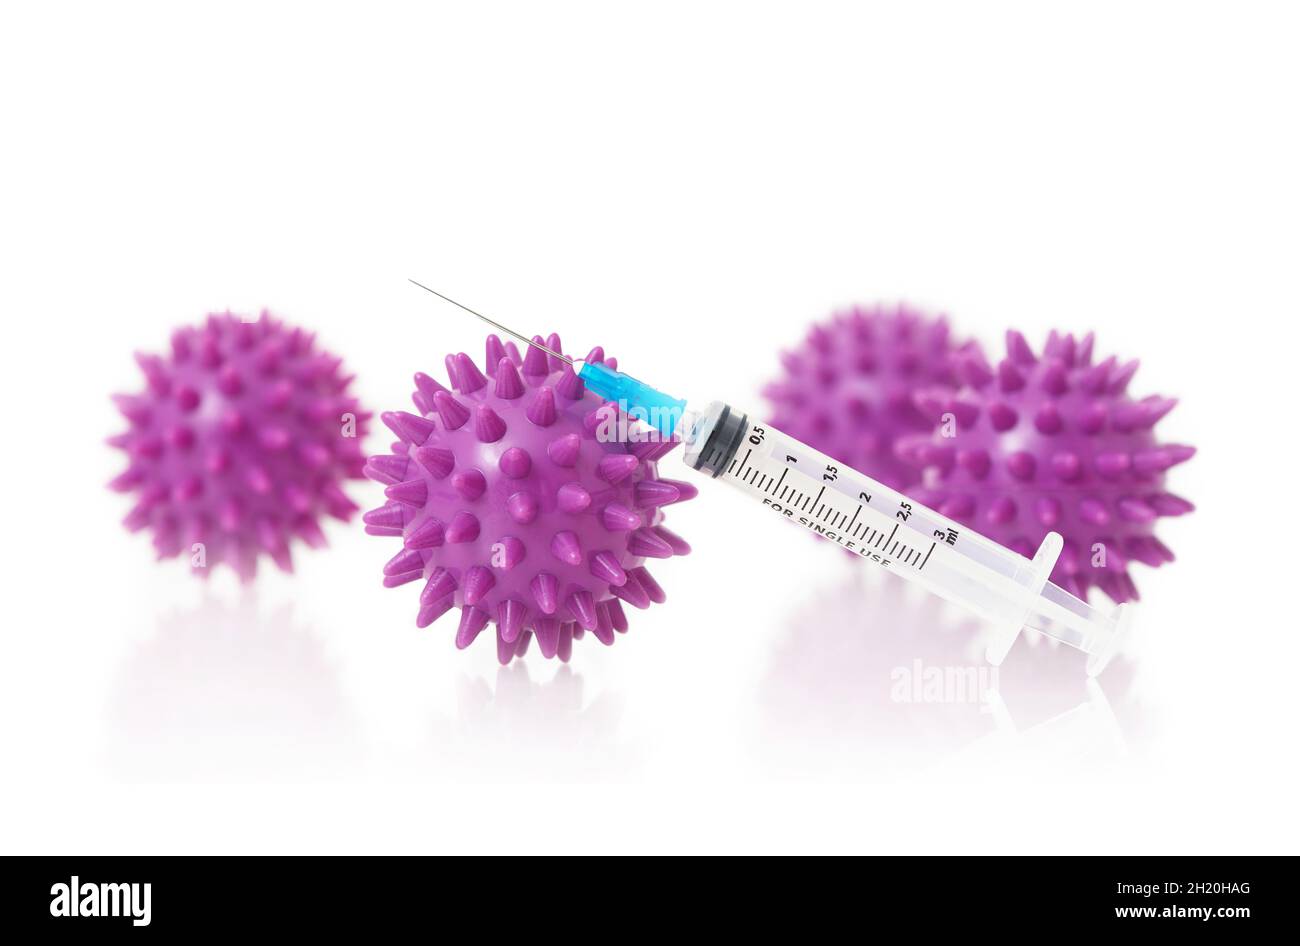 Syringe for injection against the white background with viruses. Stock Photo